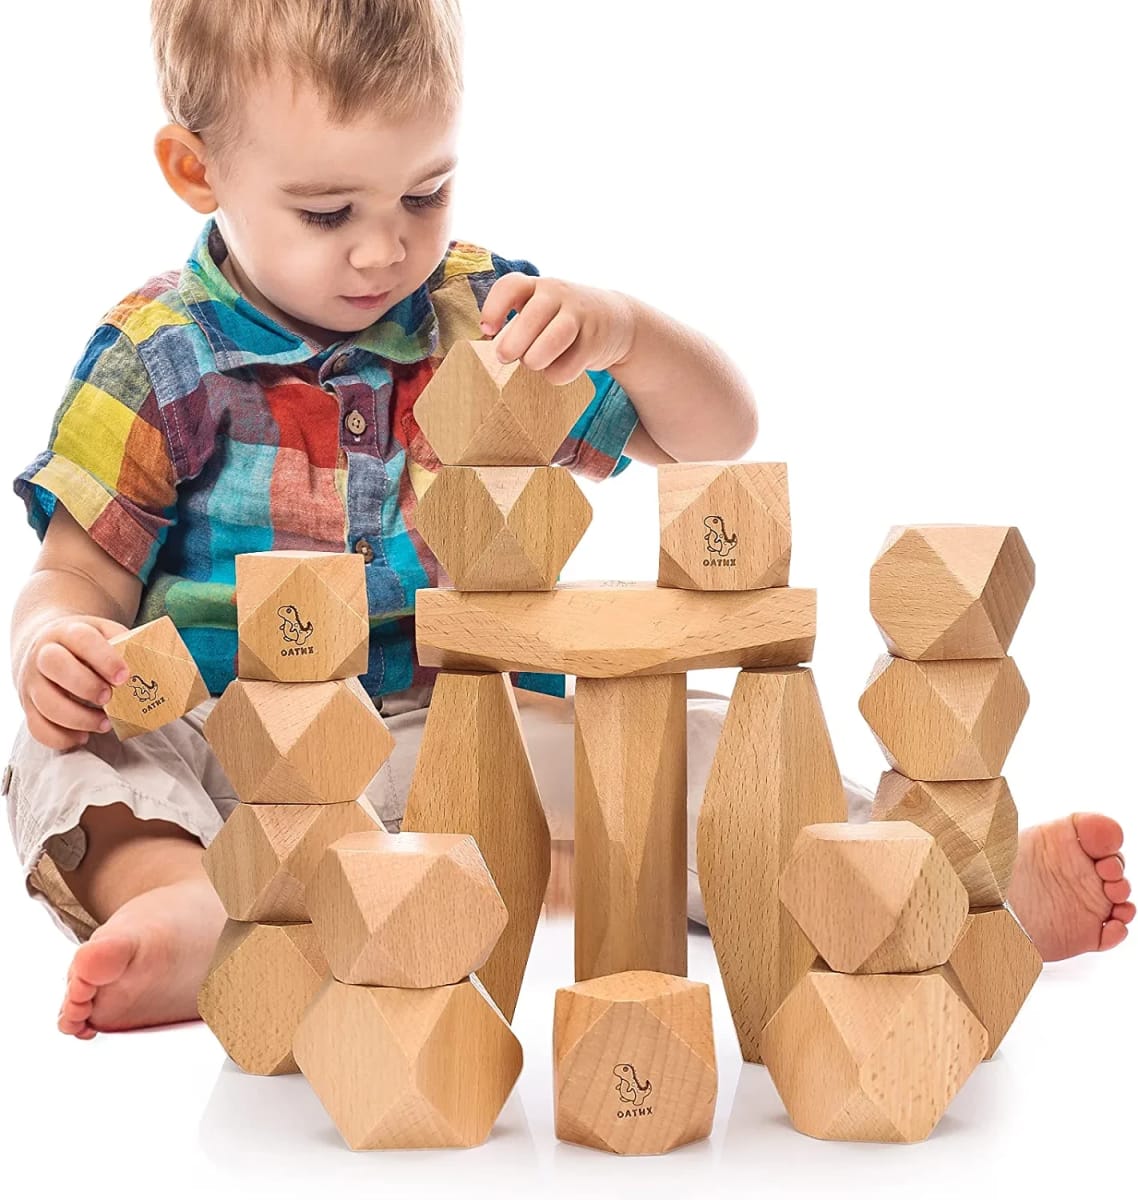 Montessori Toys Stacking Rocks Wooden Grimms Blocks Building Preschool Balancing Stones for Toddlers